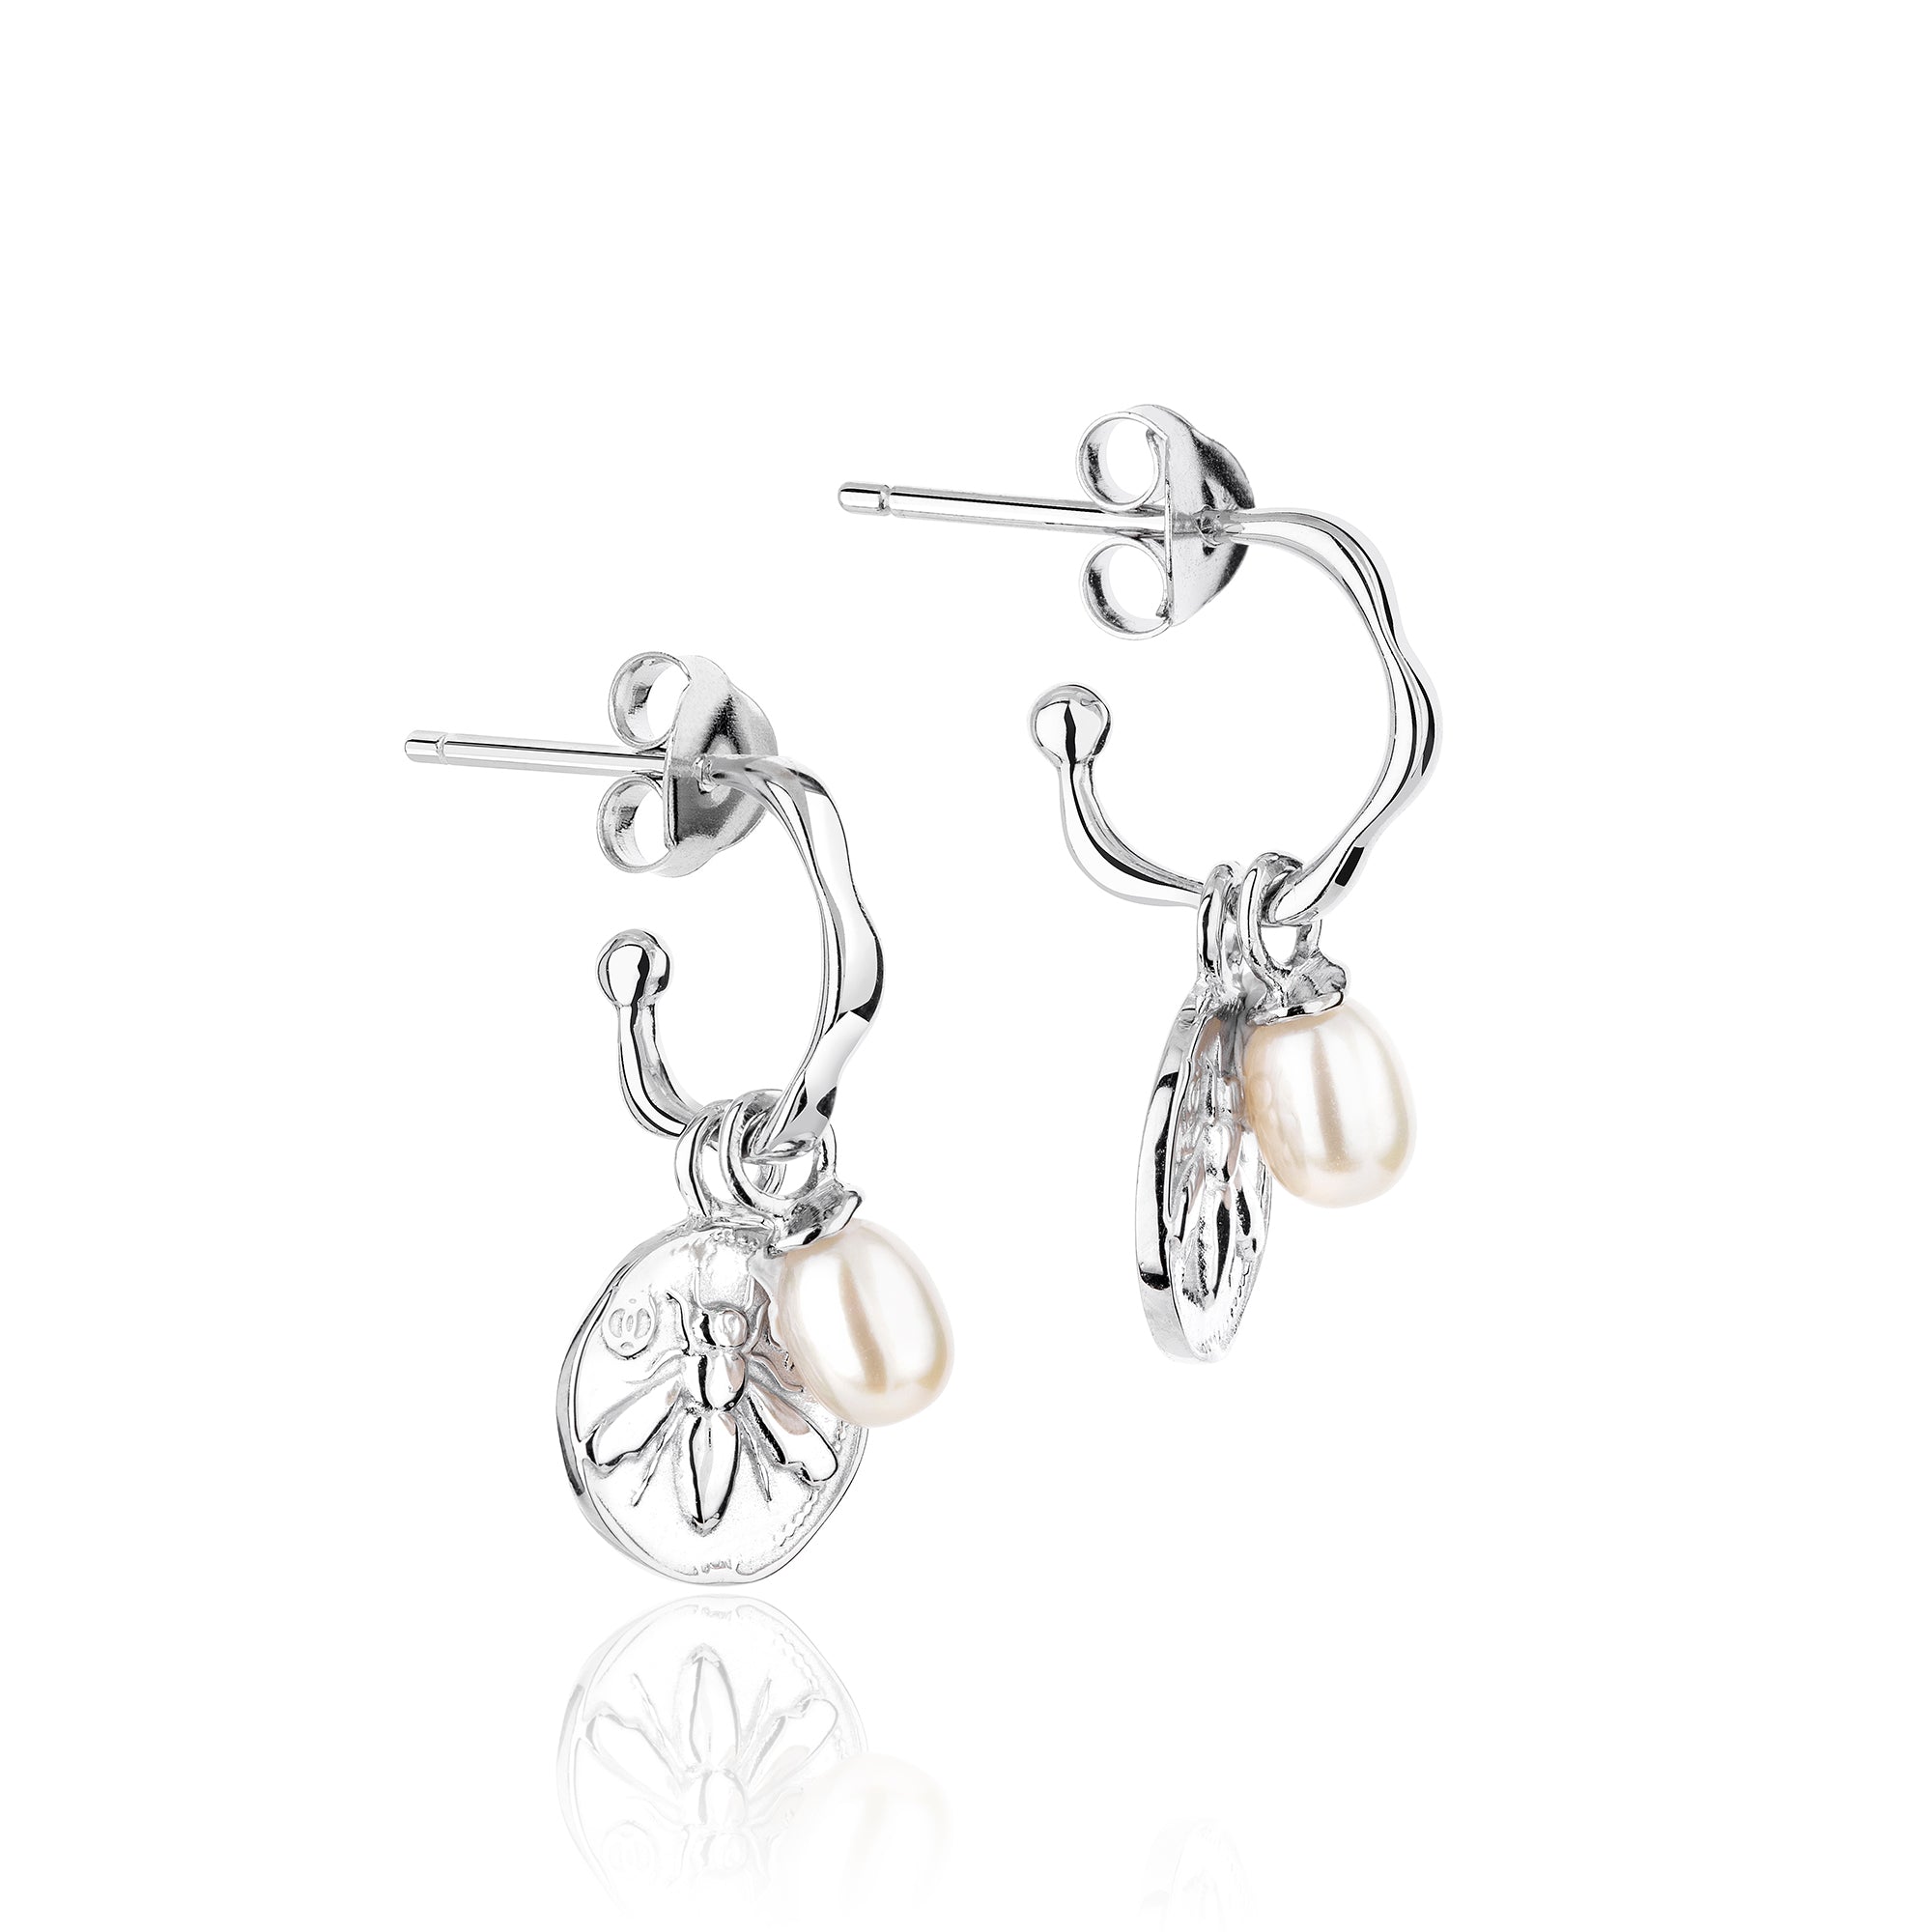 Sterling silver hoop earrings with pearl and honey bee charms